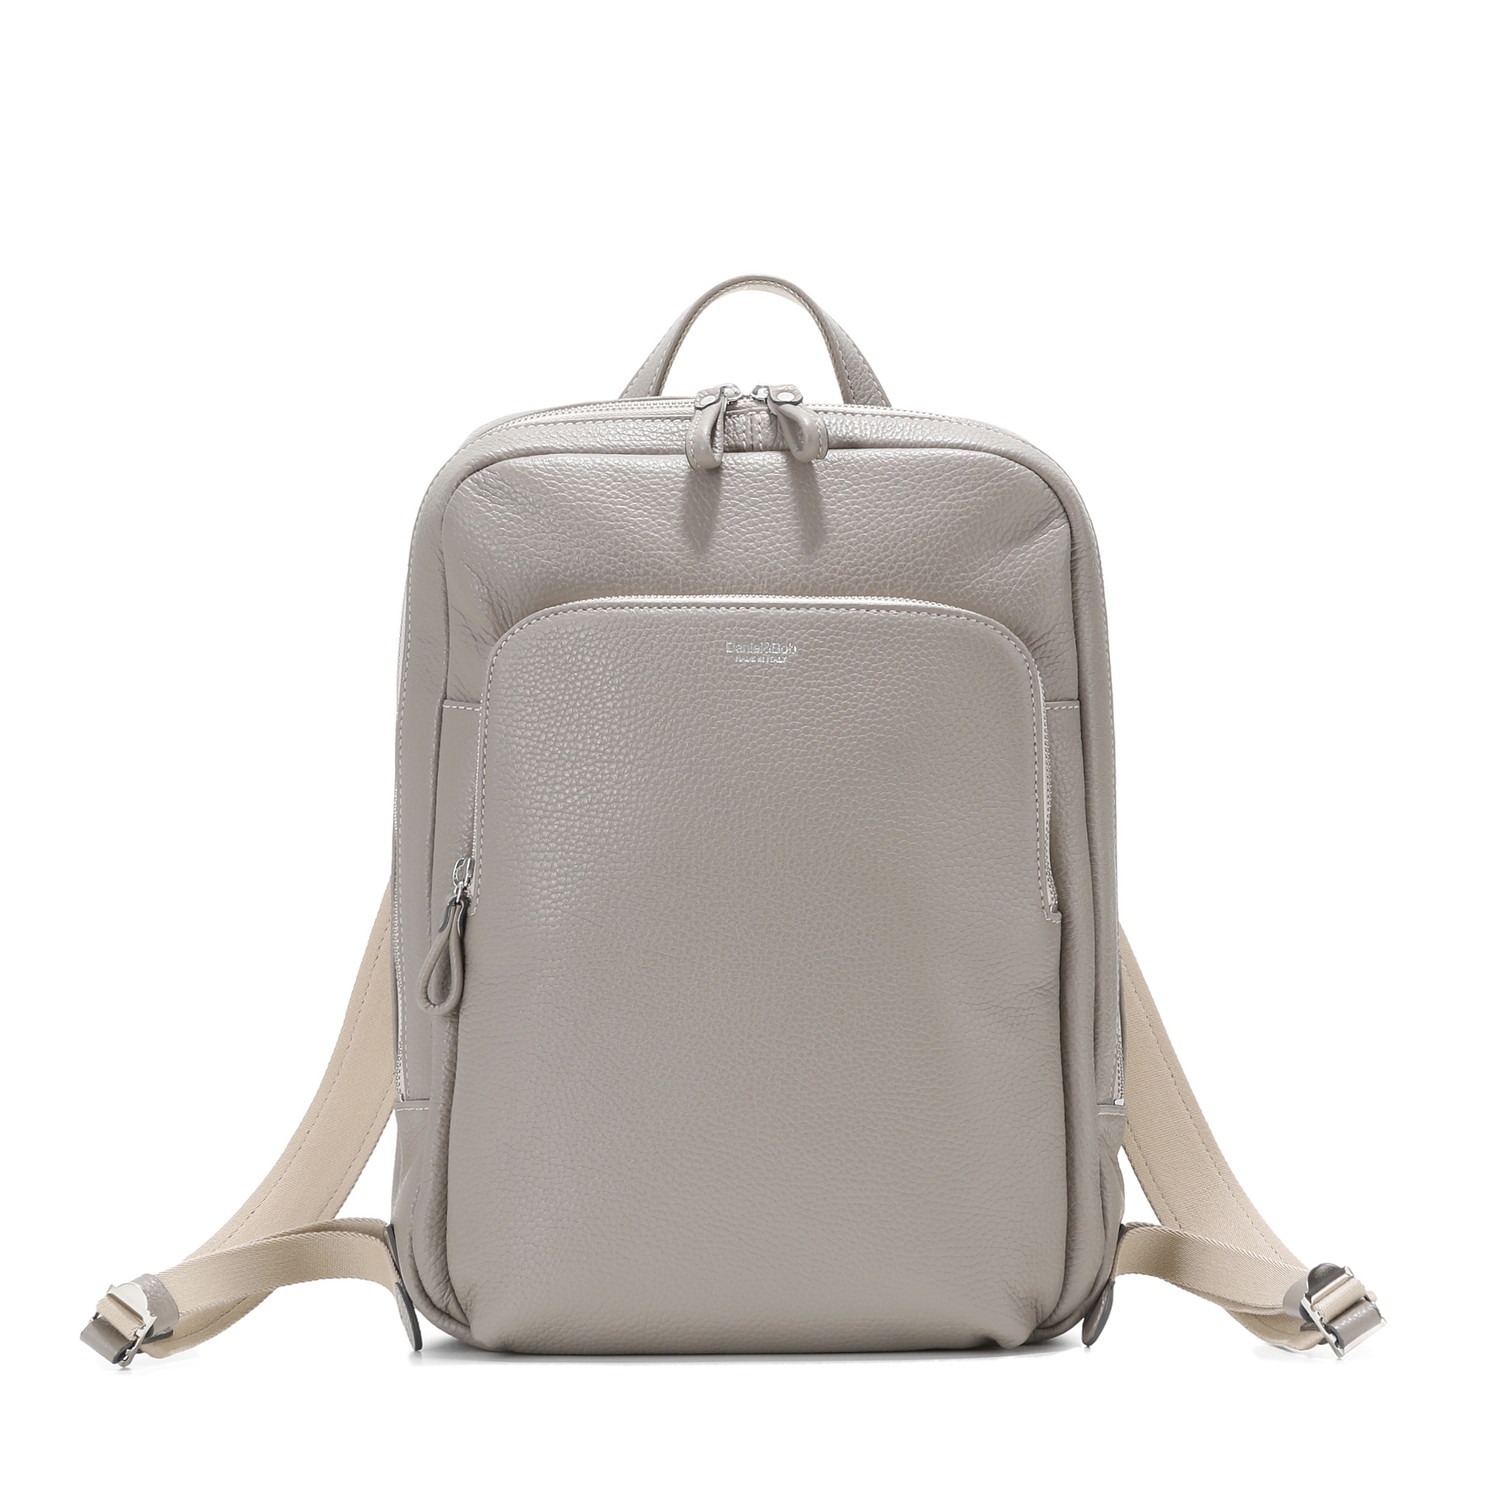 ZZ BACKPACK.27 ALCE accopiato 詳細画像 TAUPE 1